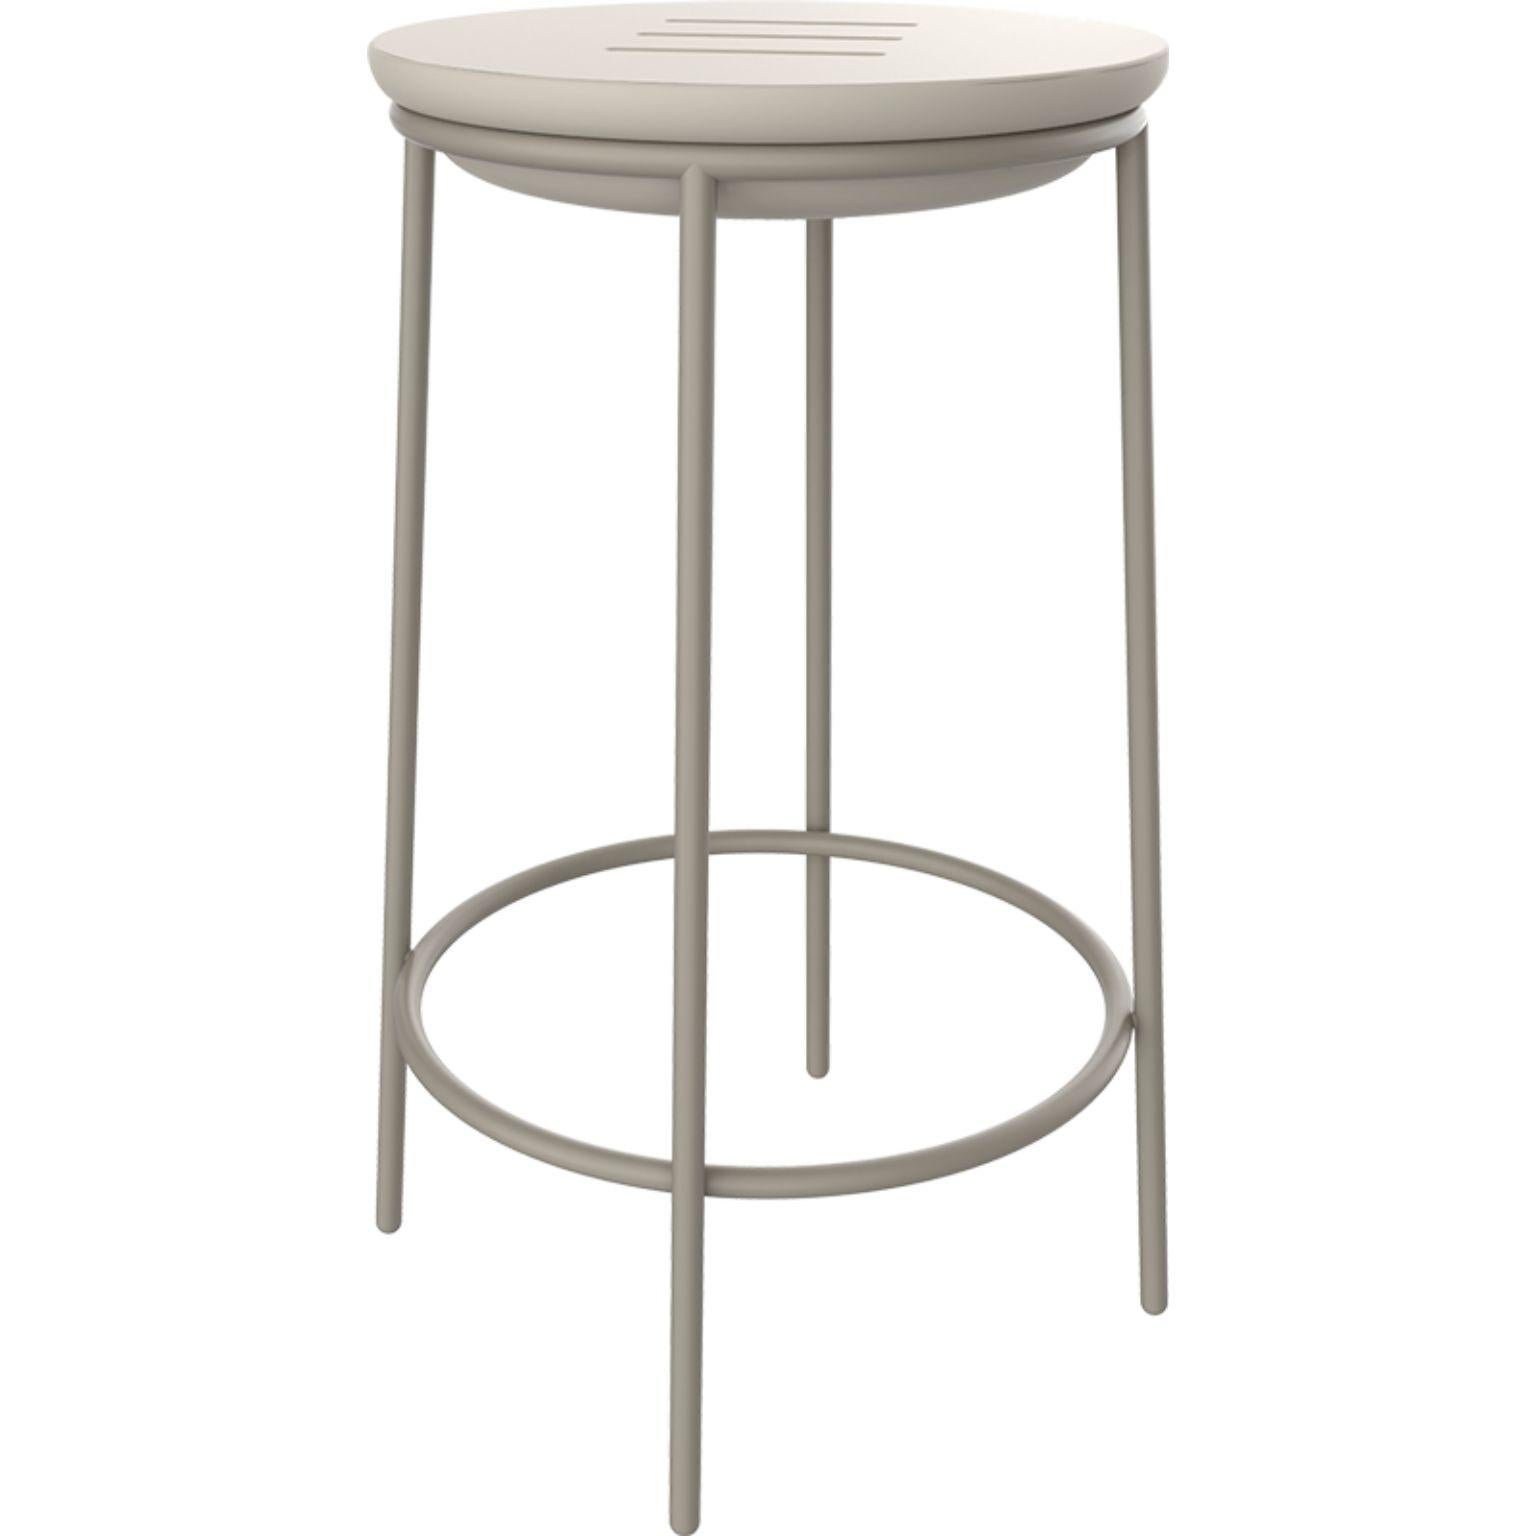 Lace cream 60 high table by MOWEE
Dimensions: D75 x H111 cm
Material: Polyethylene and stainless steel
Weight: 10.5 kg
Also available in different colors and finishes. 

Lace is a collection of furniture made by rotomoulding. Its shape